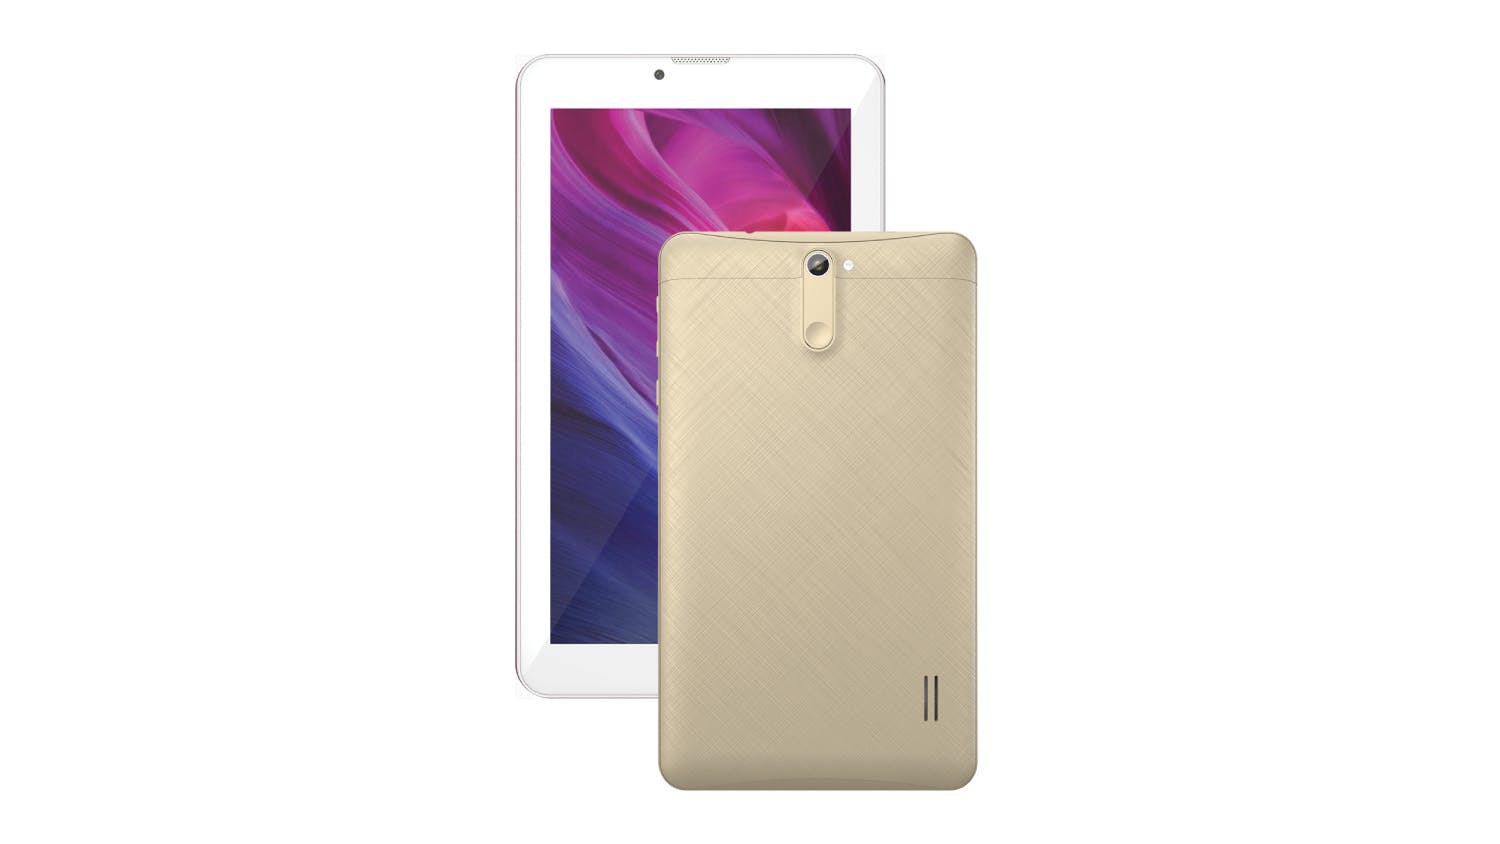 Laser 7” Android Tablet - 16GB Gold